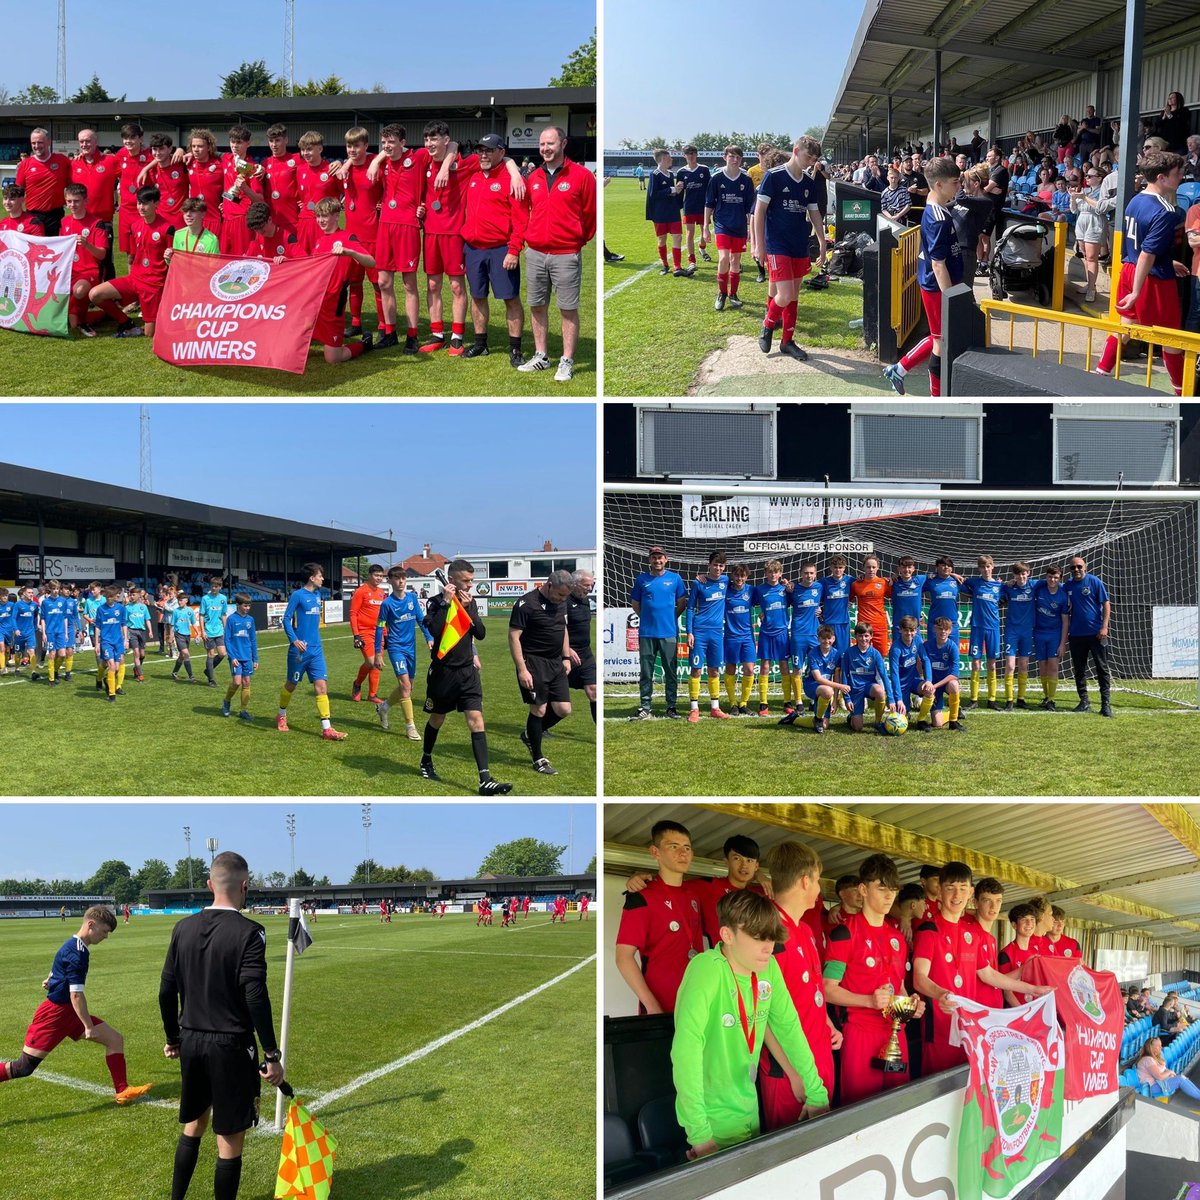 Fantastic day one as Belle Vue played host to the Rhyl & District Junior cup finals. #CommunityClub #NotForProfit #AllVolunteers